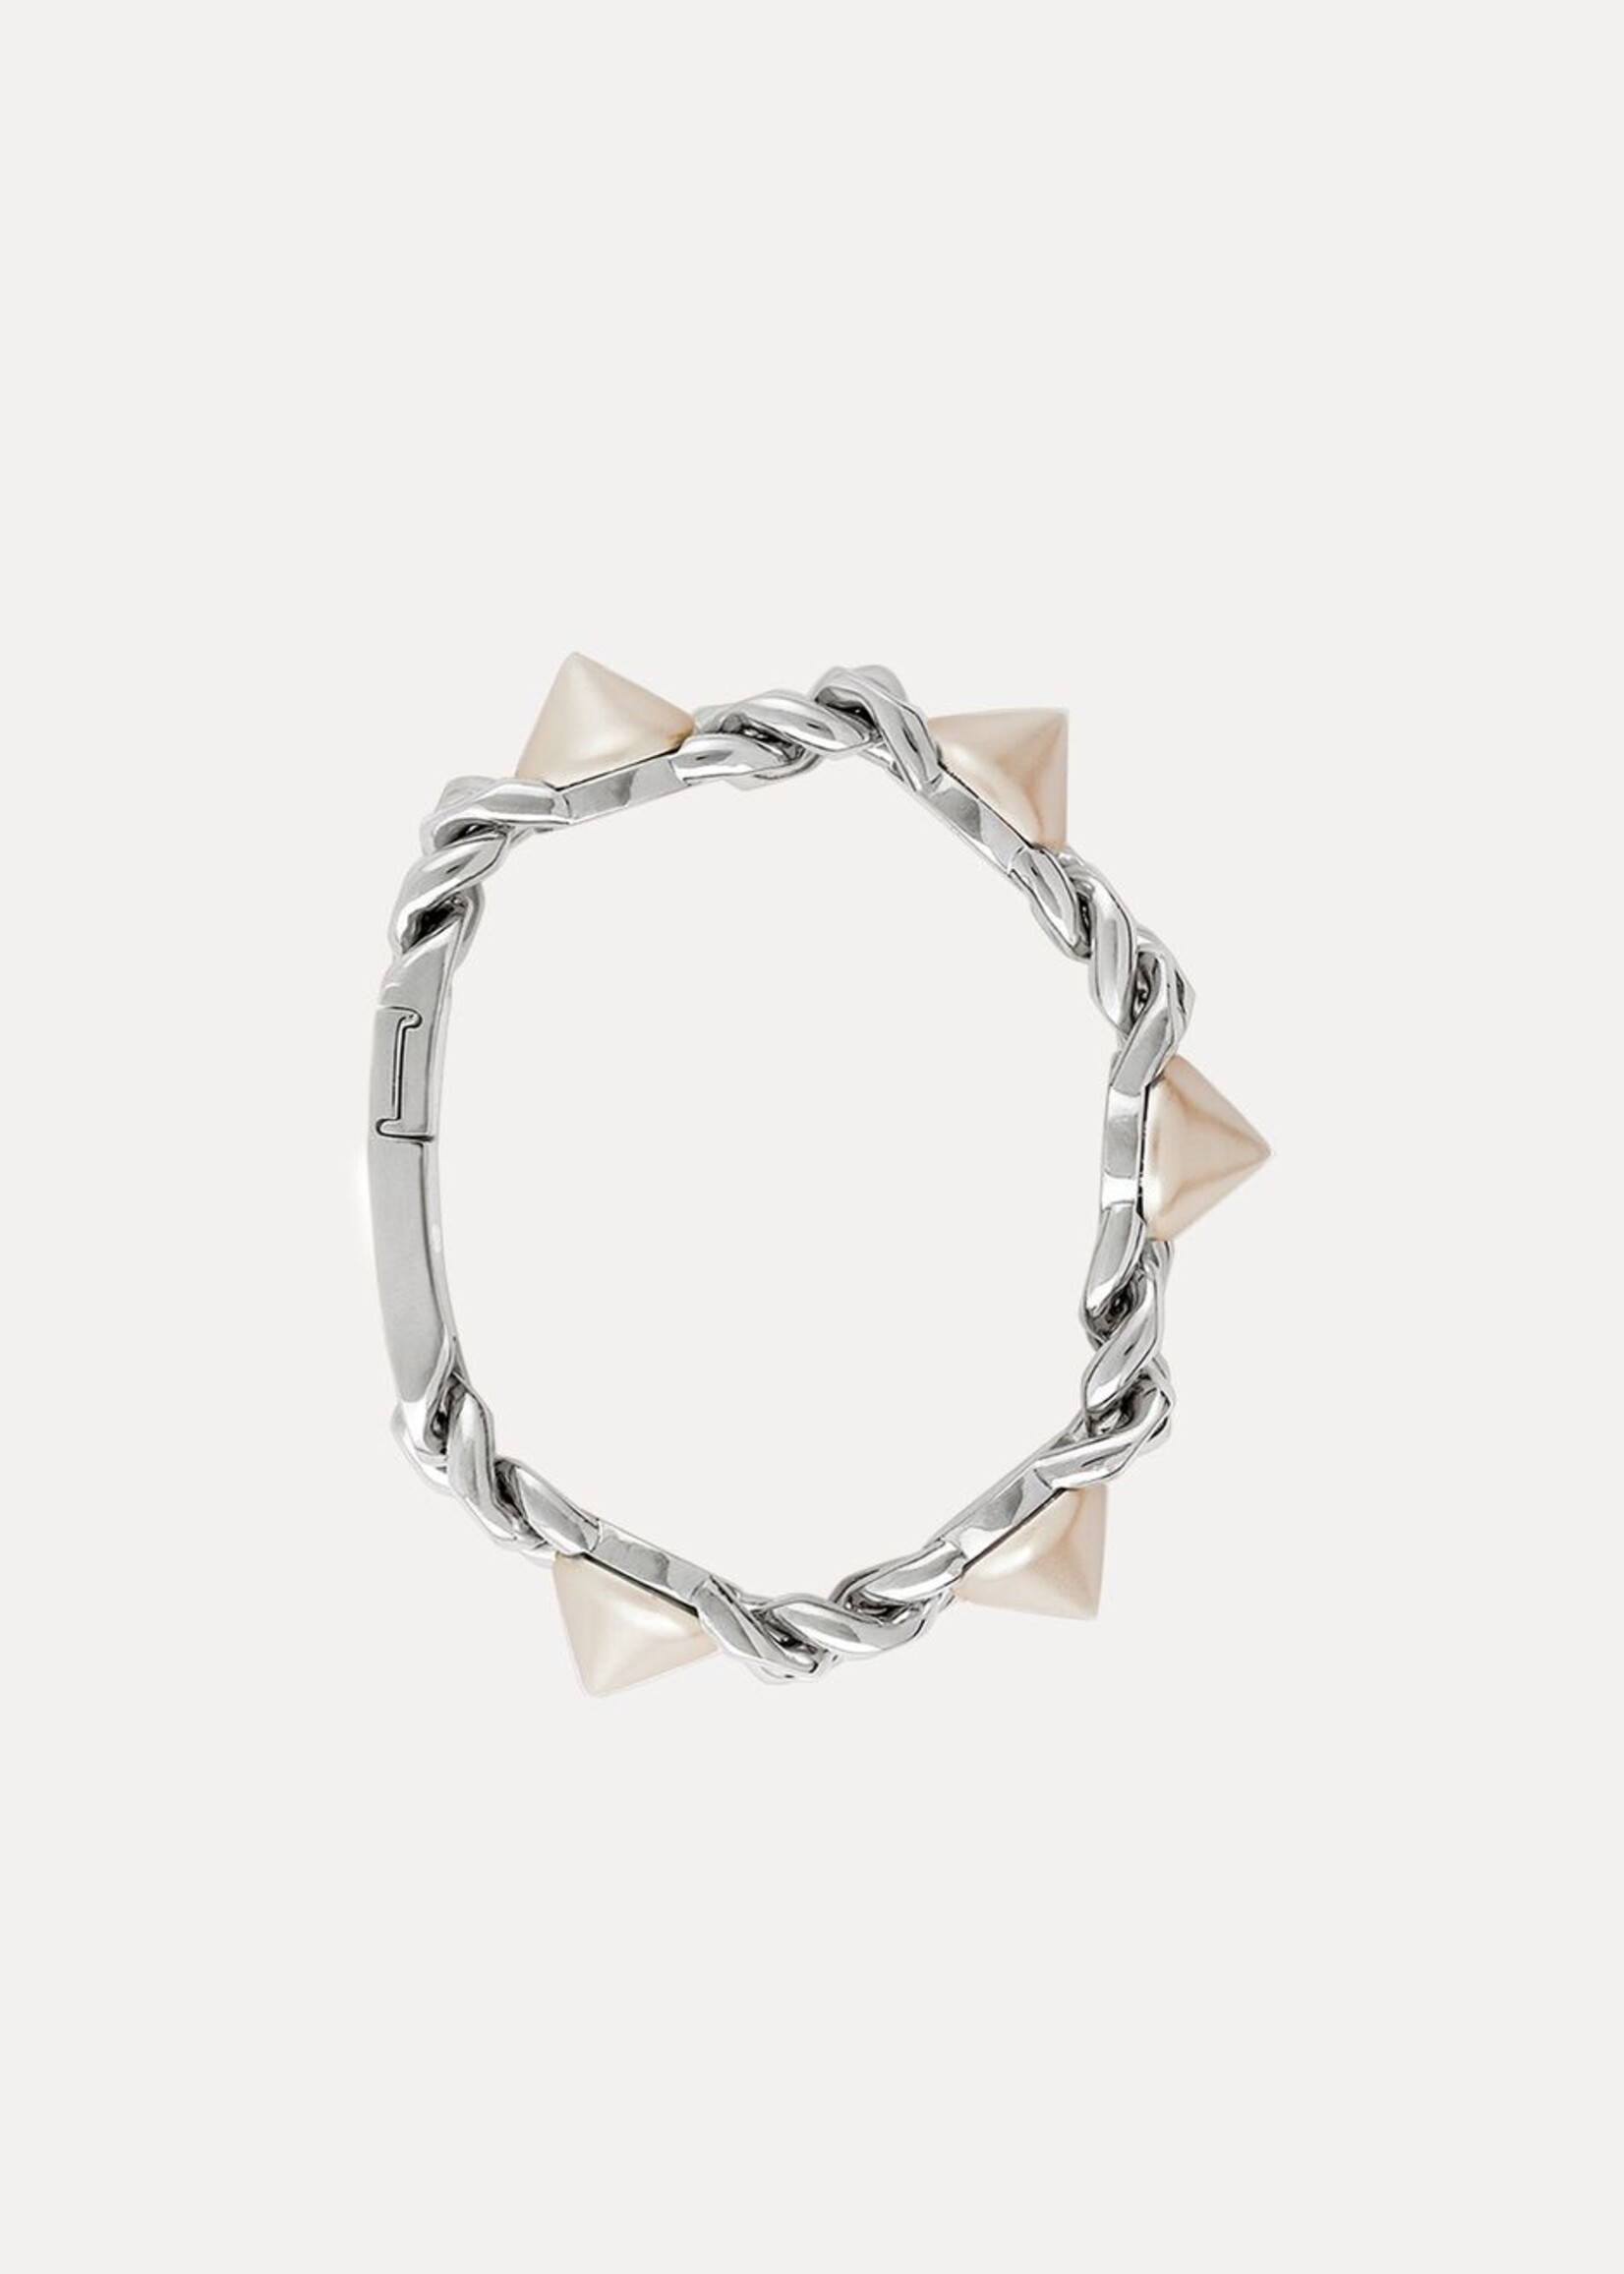 VIVIENNE WESTWOOD Elettra Chain and Stud Bracelet in Silver